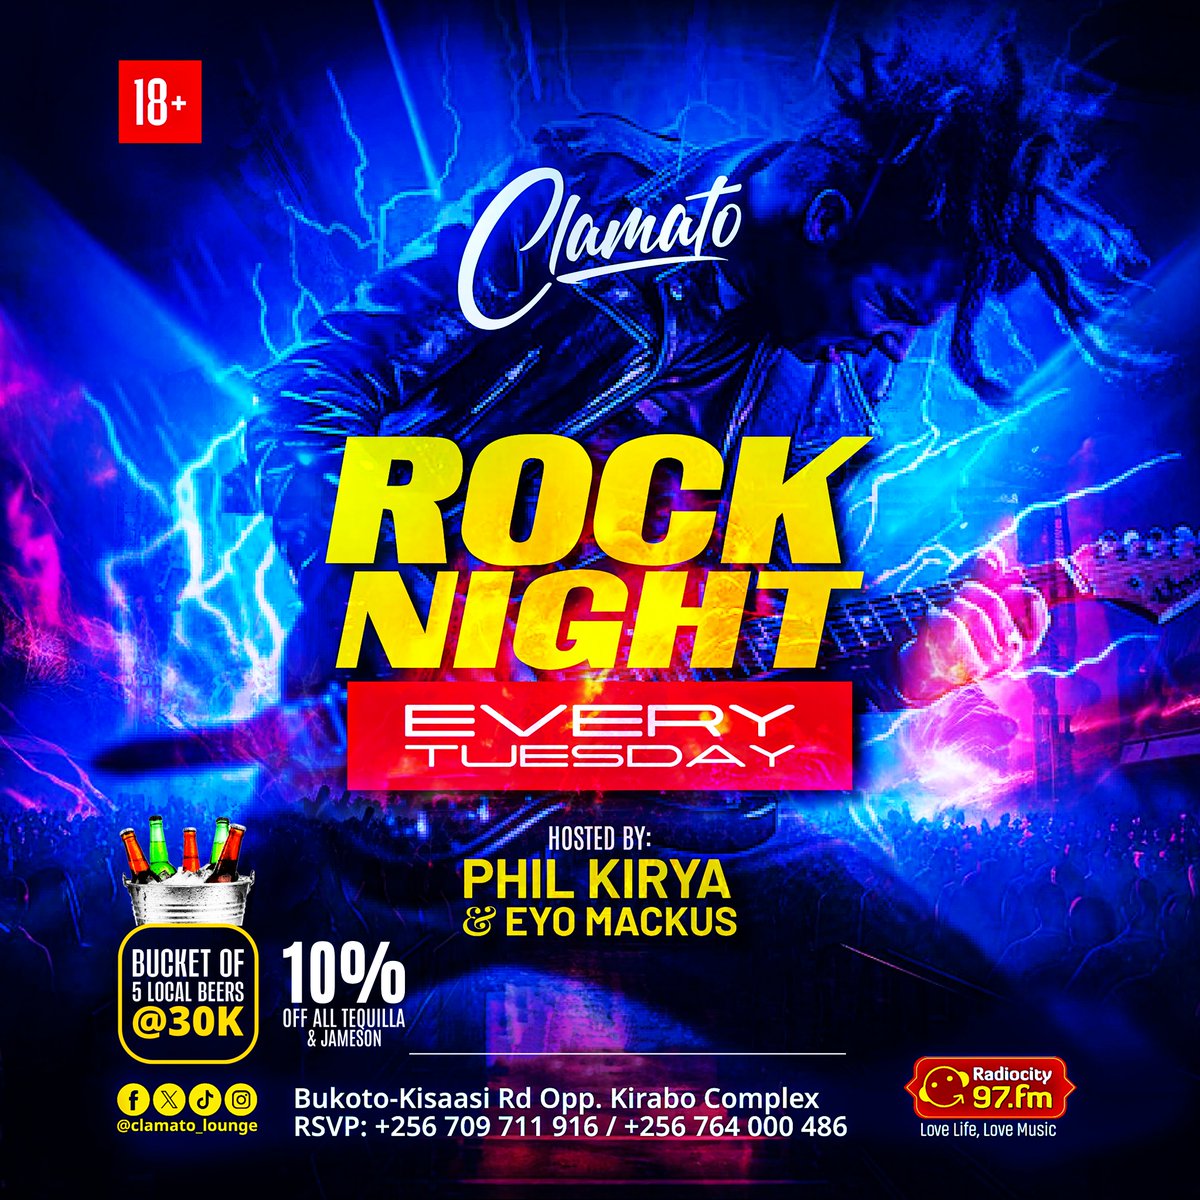 It is almost time for #ClamatoRockTuesdays hosted by the amazing @PhilKirya and @EyoMackus at @clamato_lounge Remember we have a bucket night. Any 5 local beers go for 30k !